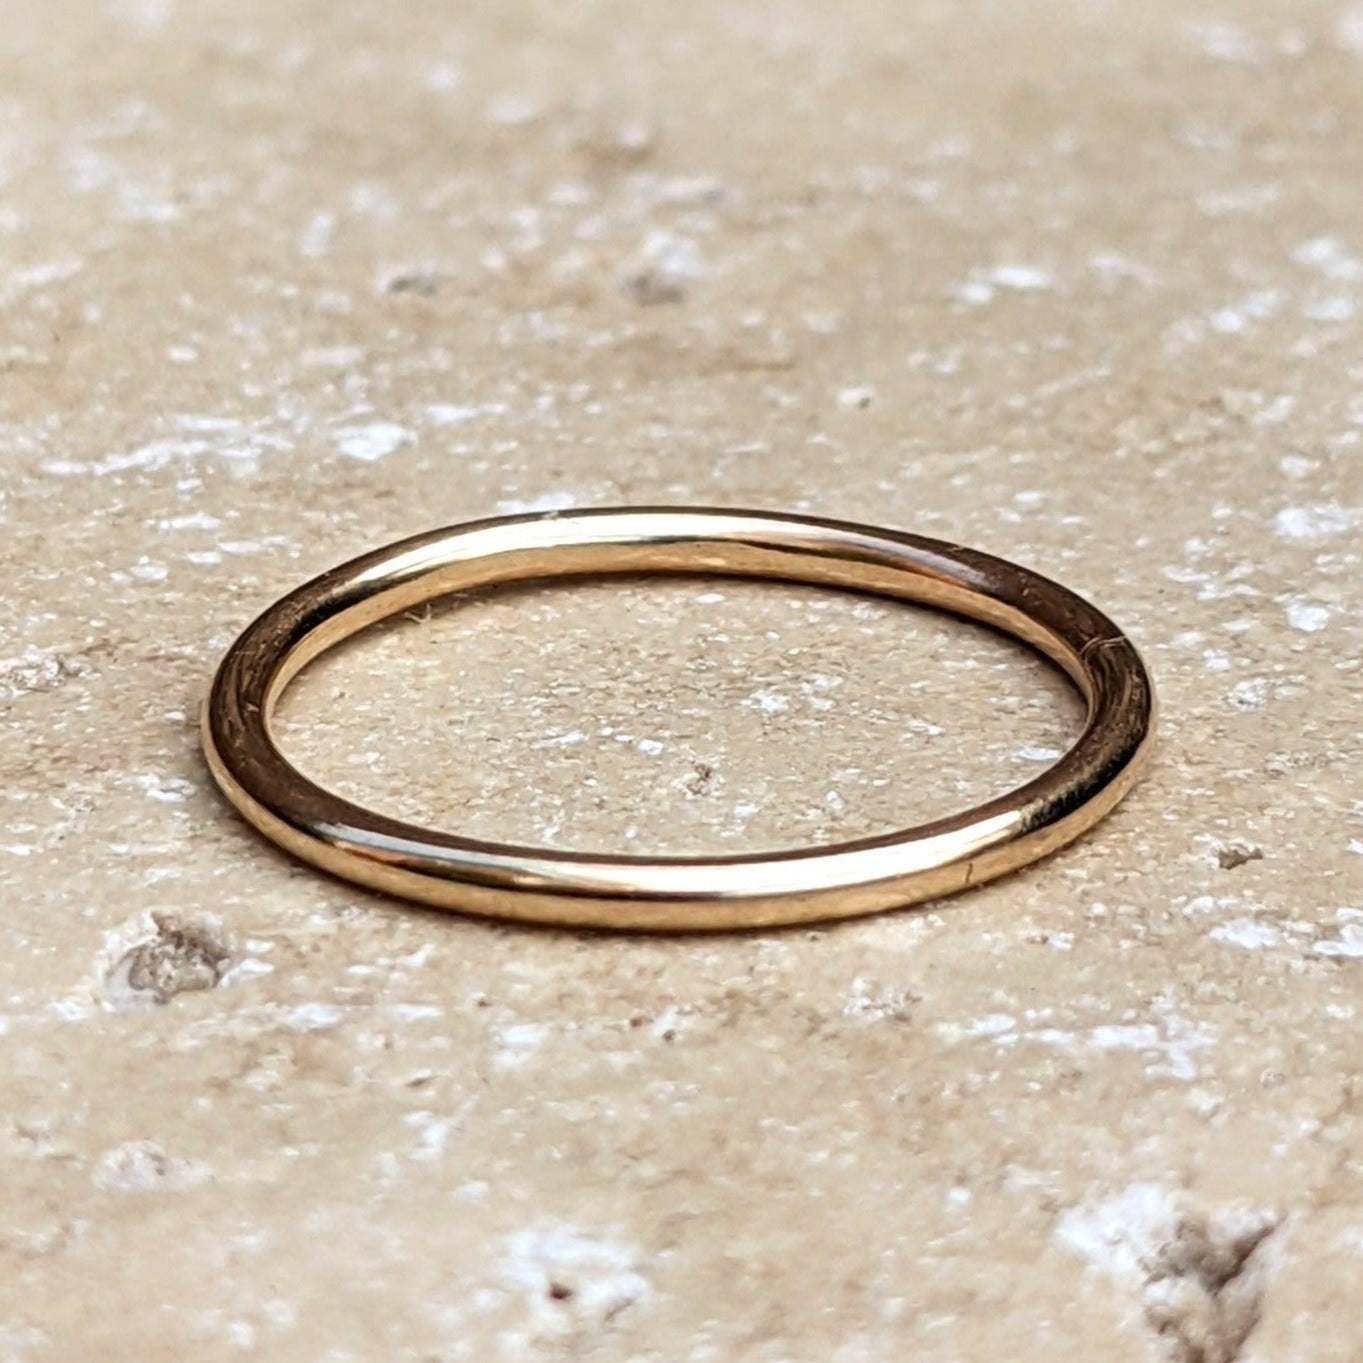 Smooth gold filled ring